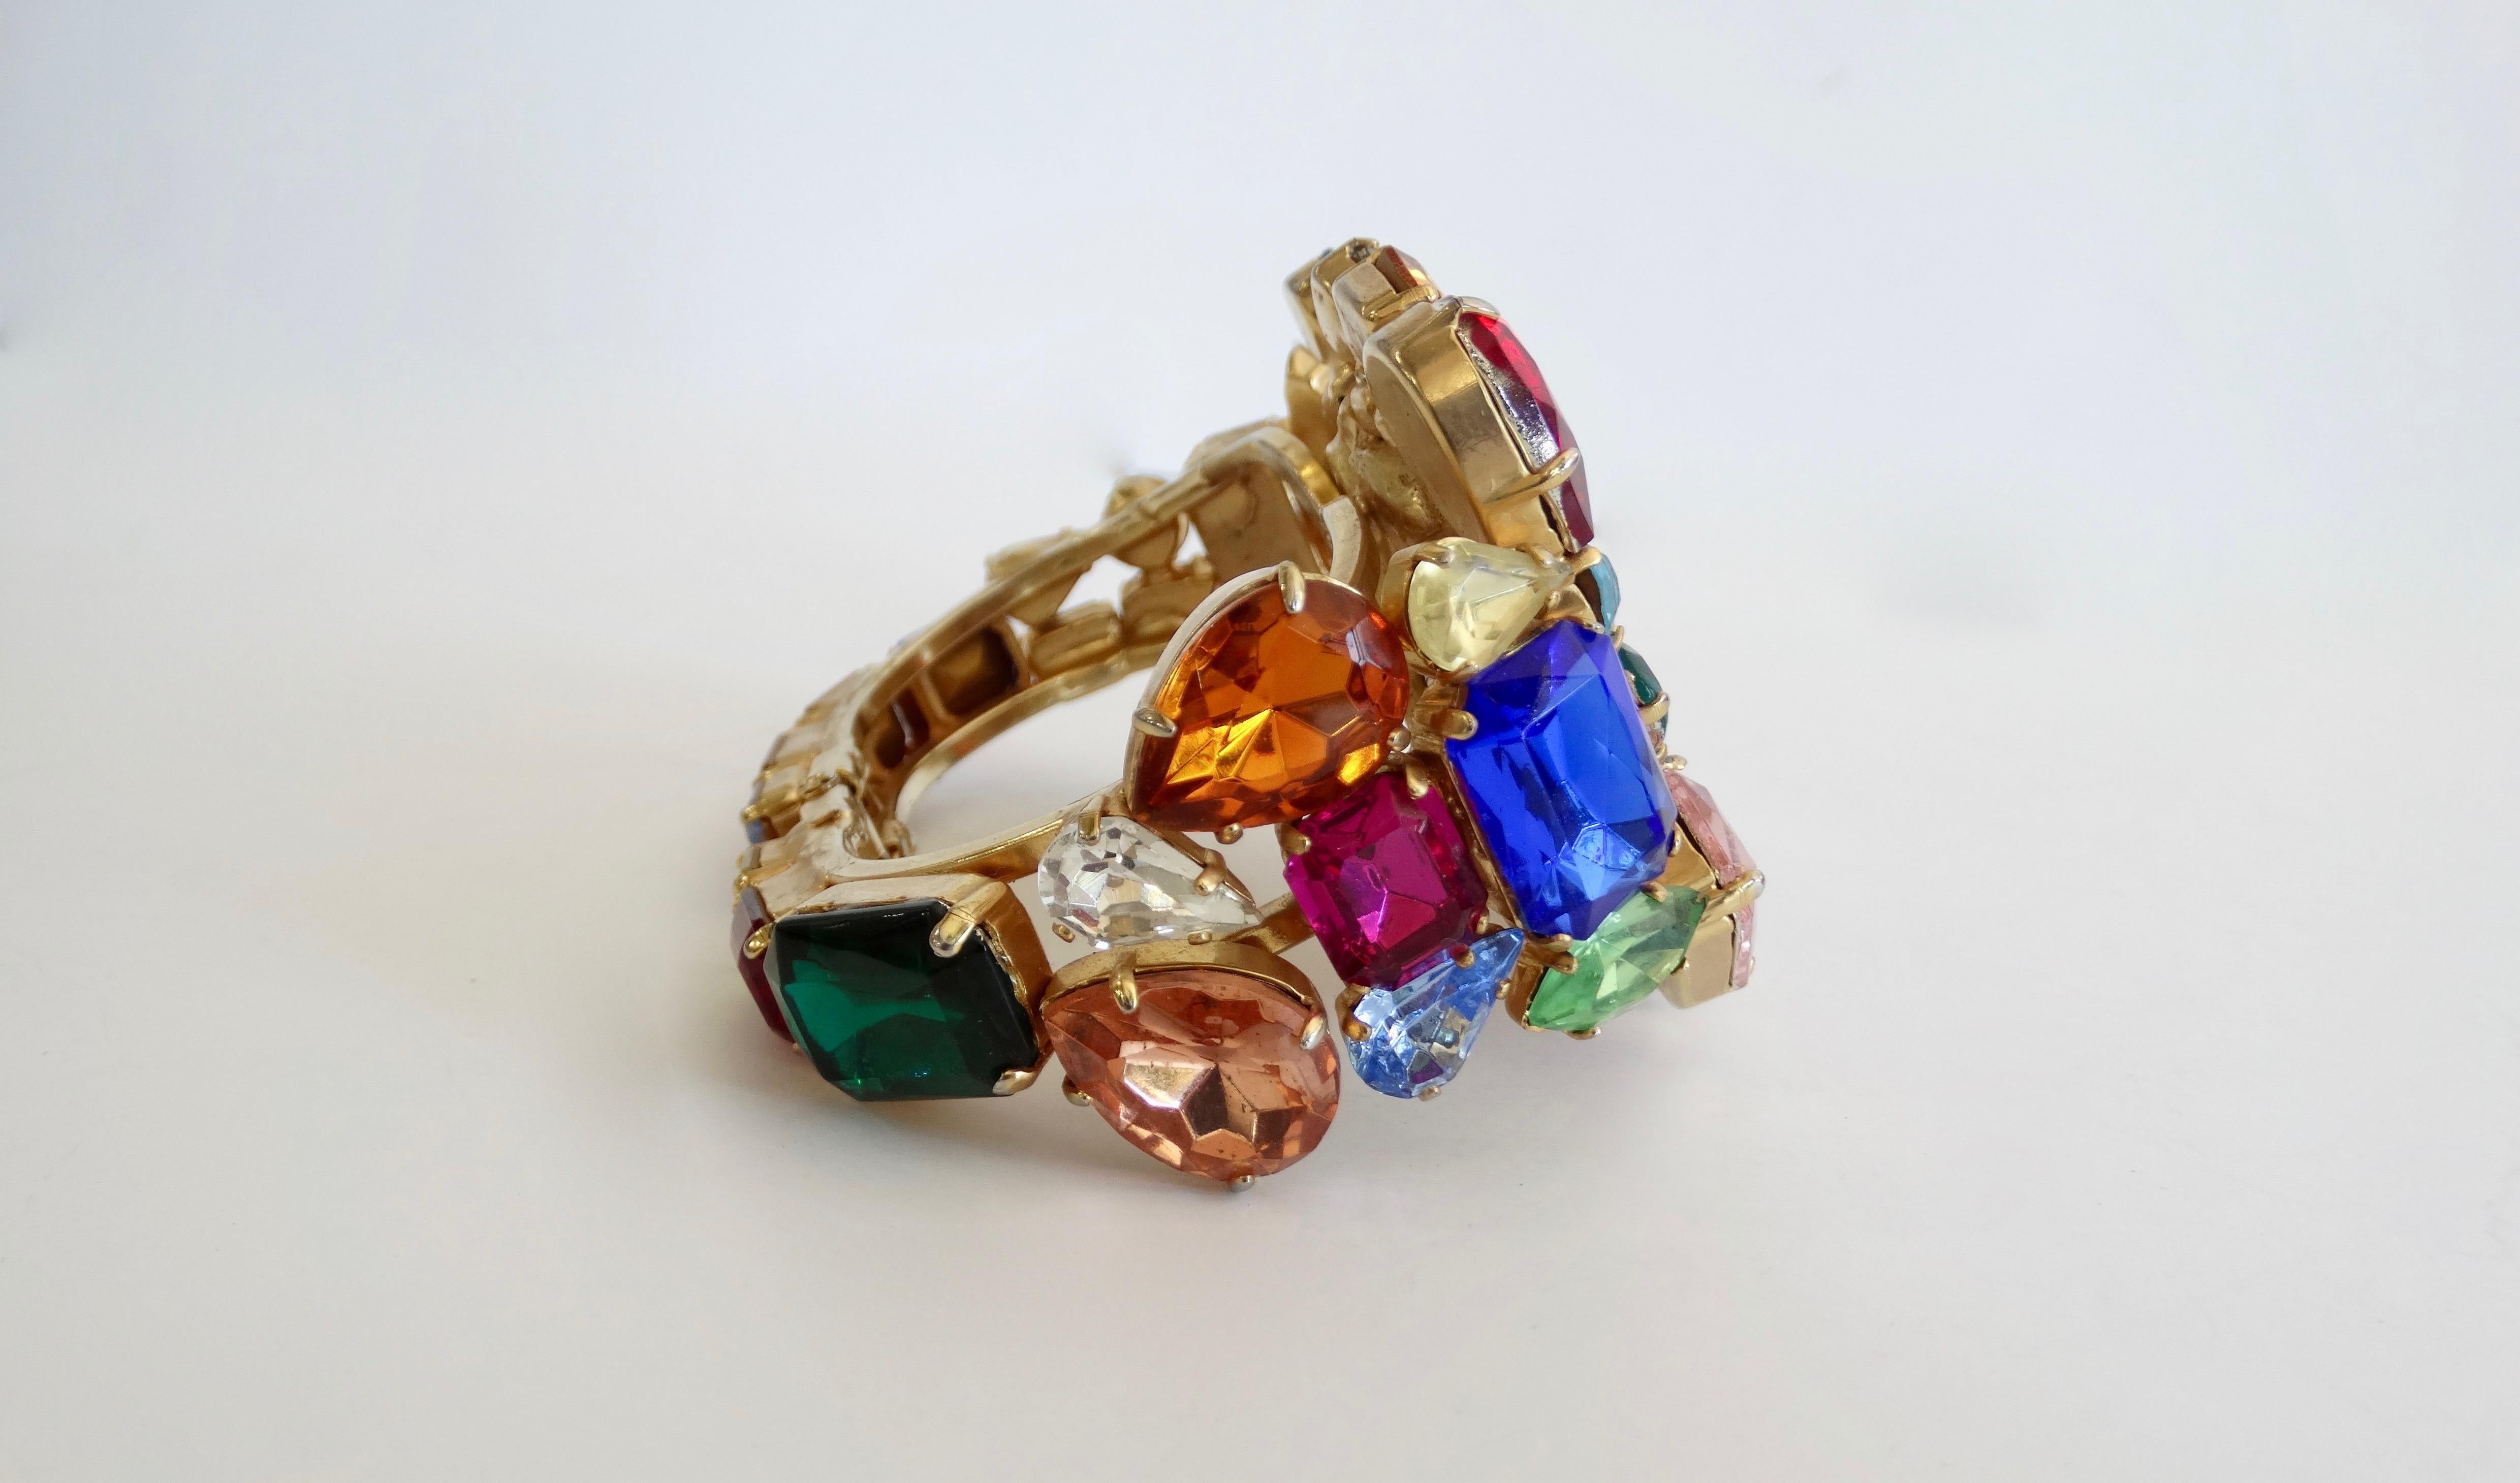 Wear your heart on your wrist with this amazing heart cuff! Circa 1980s, this unsigned cuff is embellished with various sizes and colors of rhinestones. Features a large rhinestone heart in the center and an easy clamp closure. Reminiscent of past